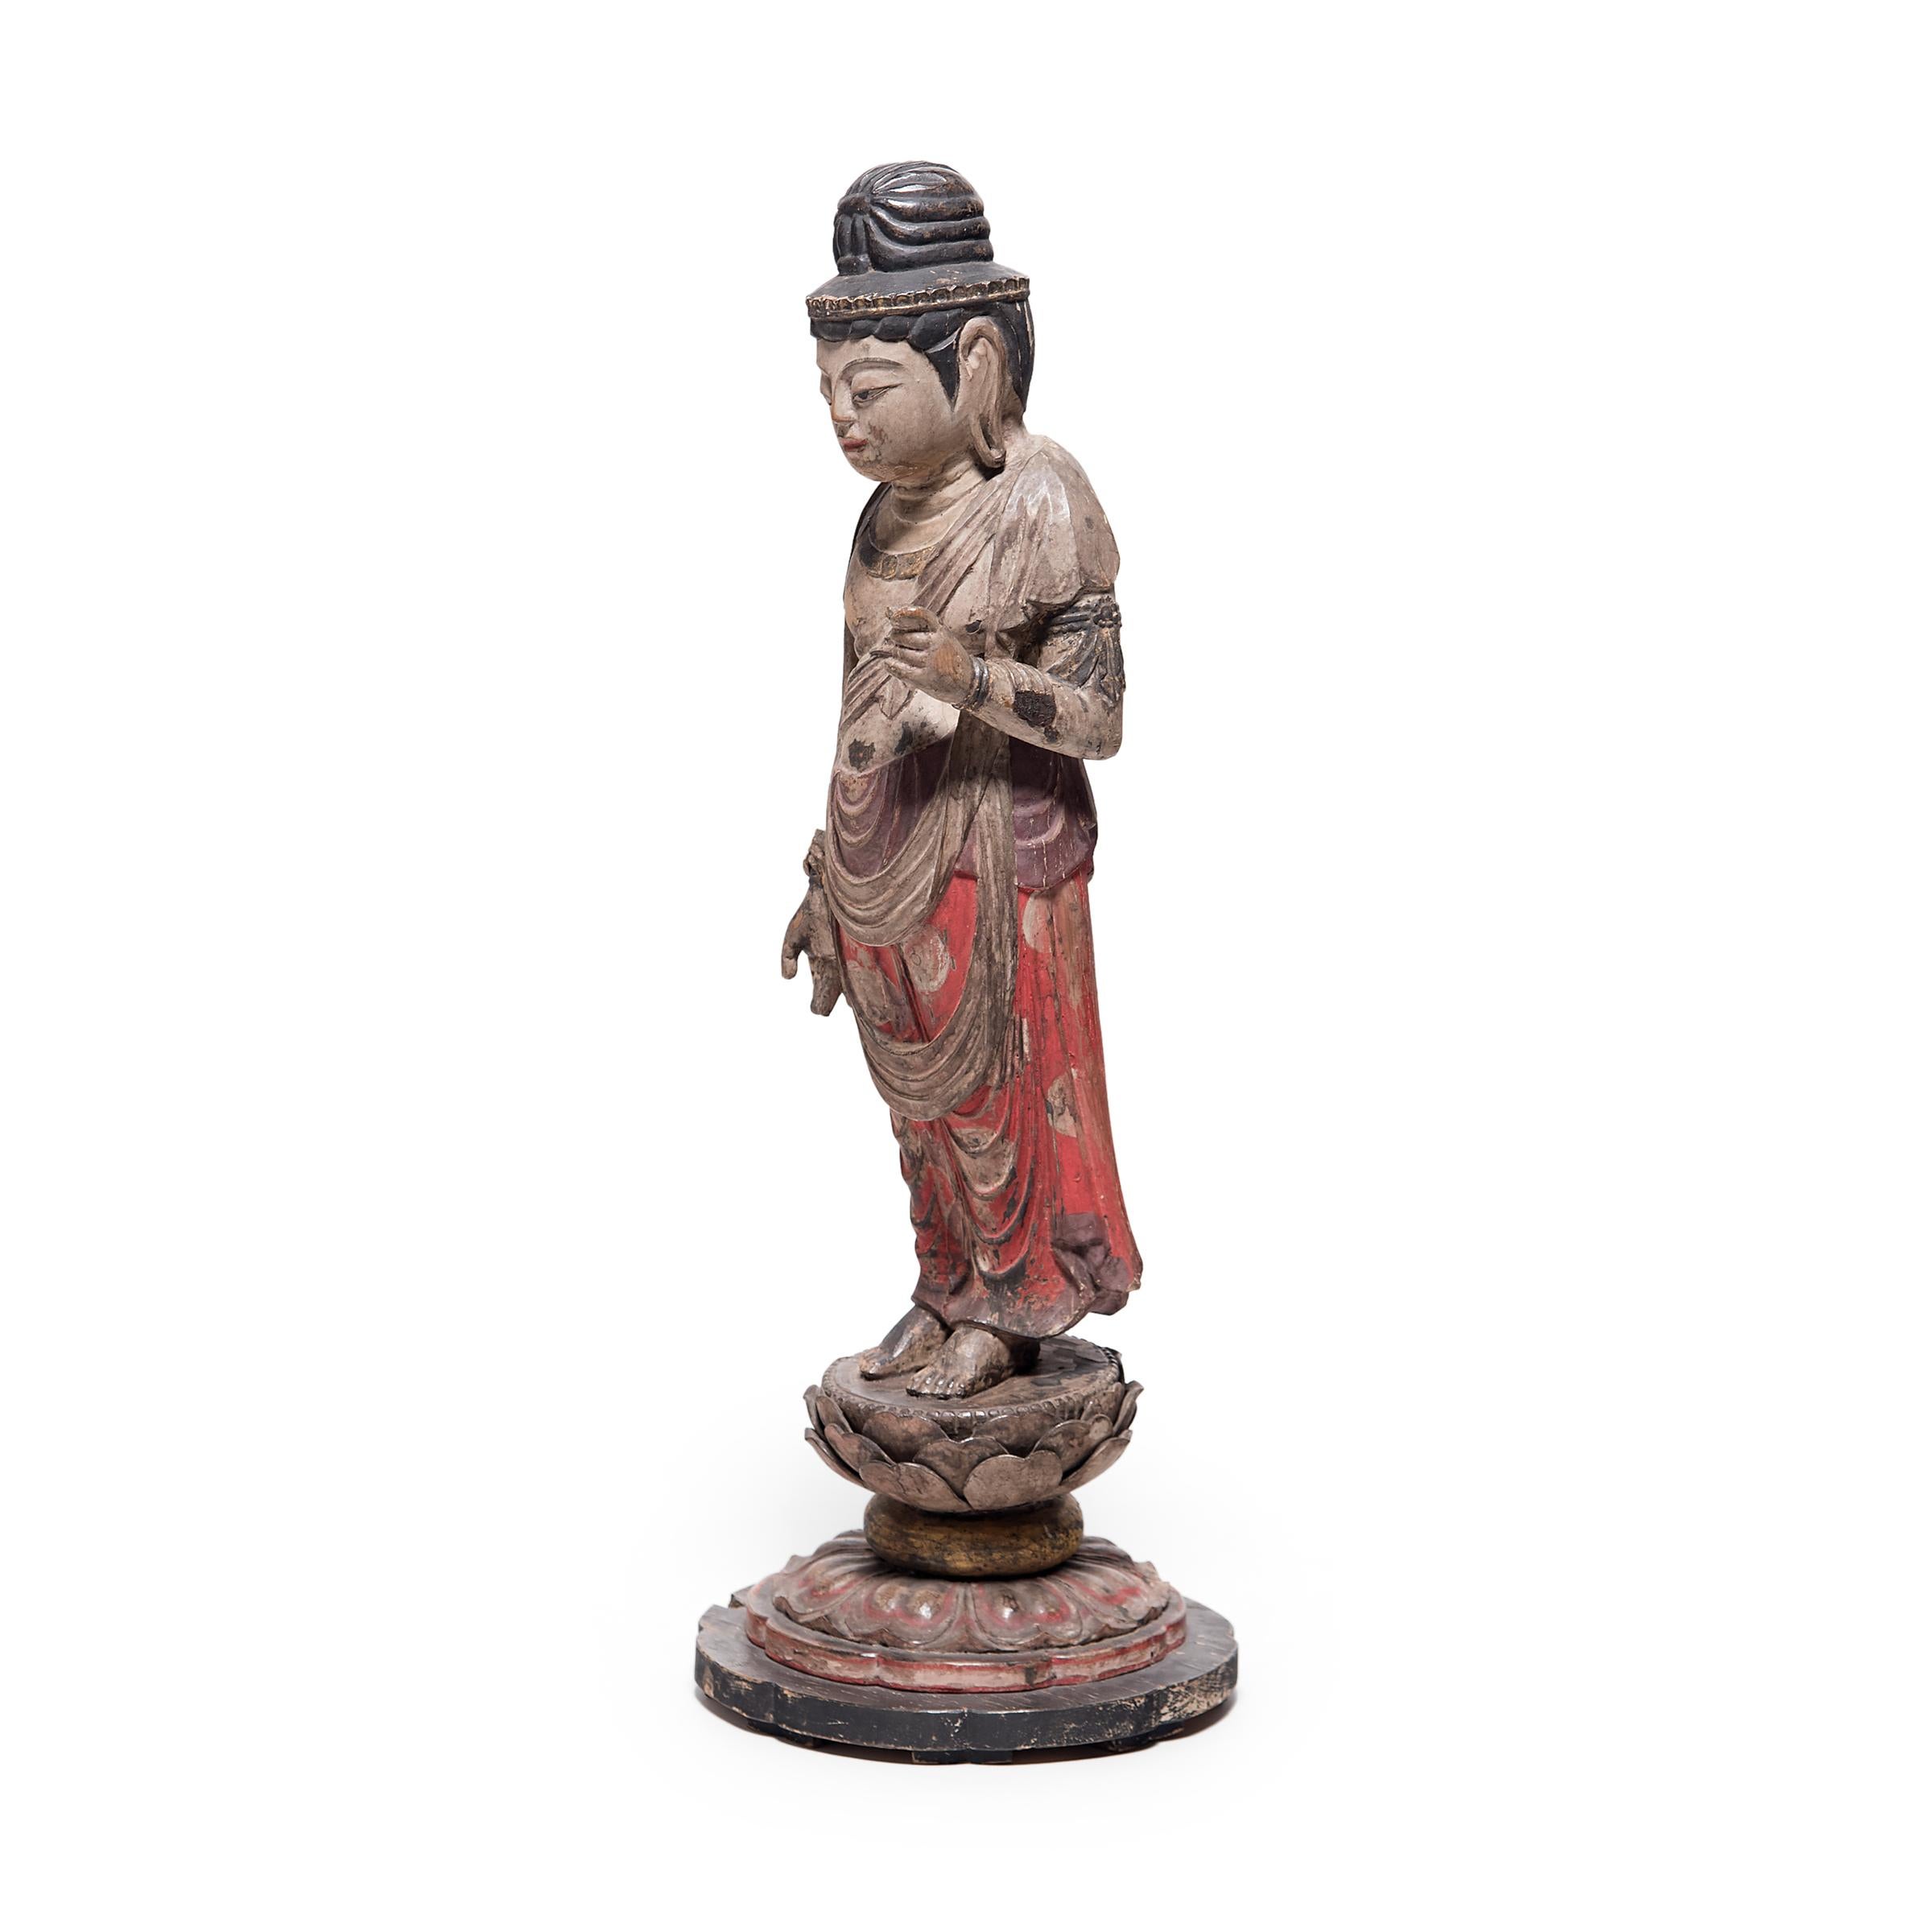 This late 19th century standing figure depicts the sacred form of the bodhisattva Guanyin, known in Japanese Buddhism as Sho Kannon, or Guze Kannon. Described as the 